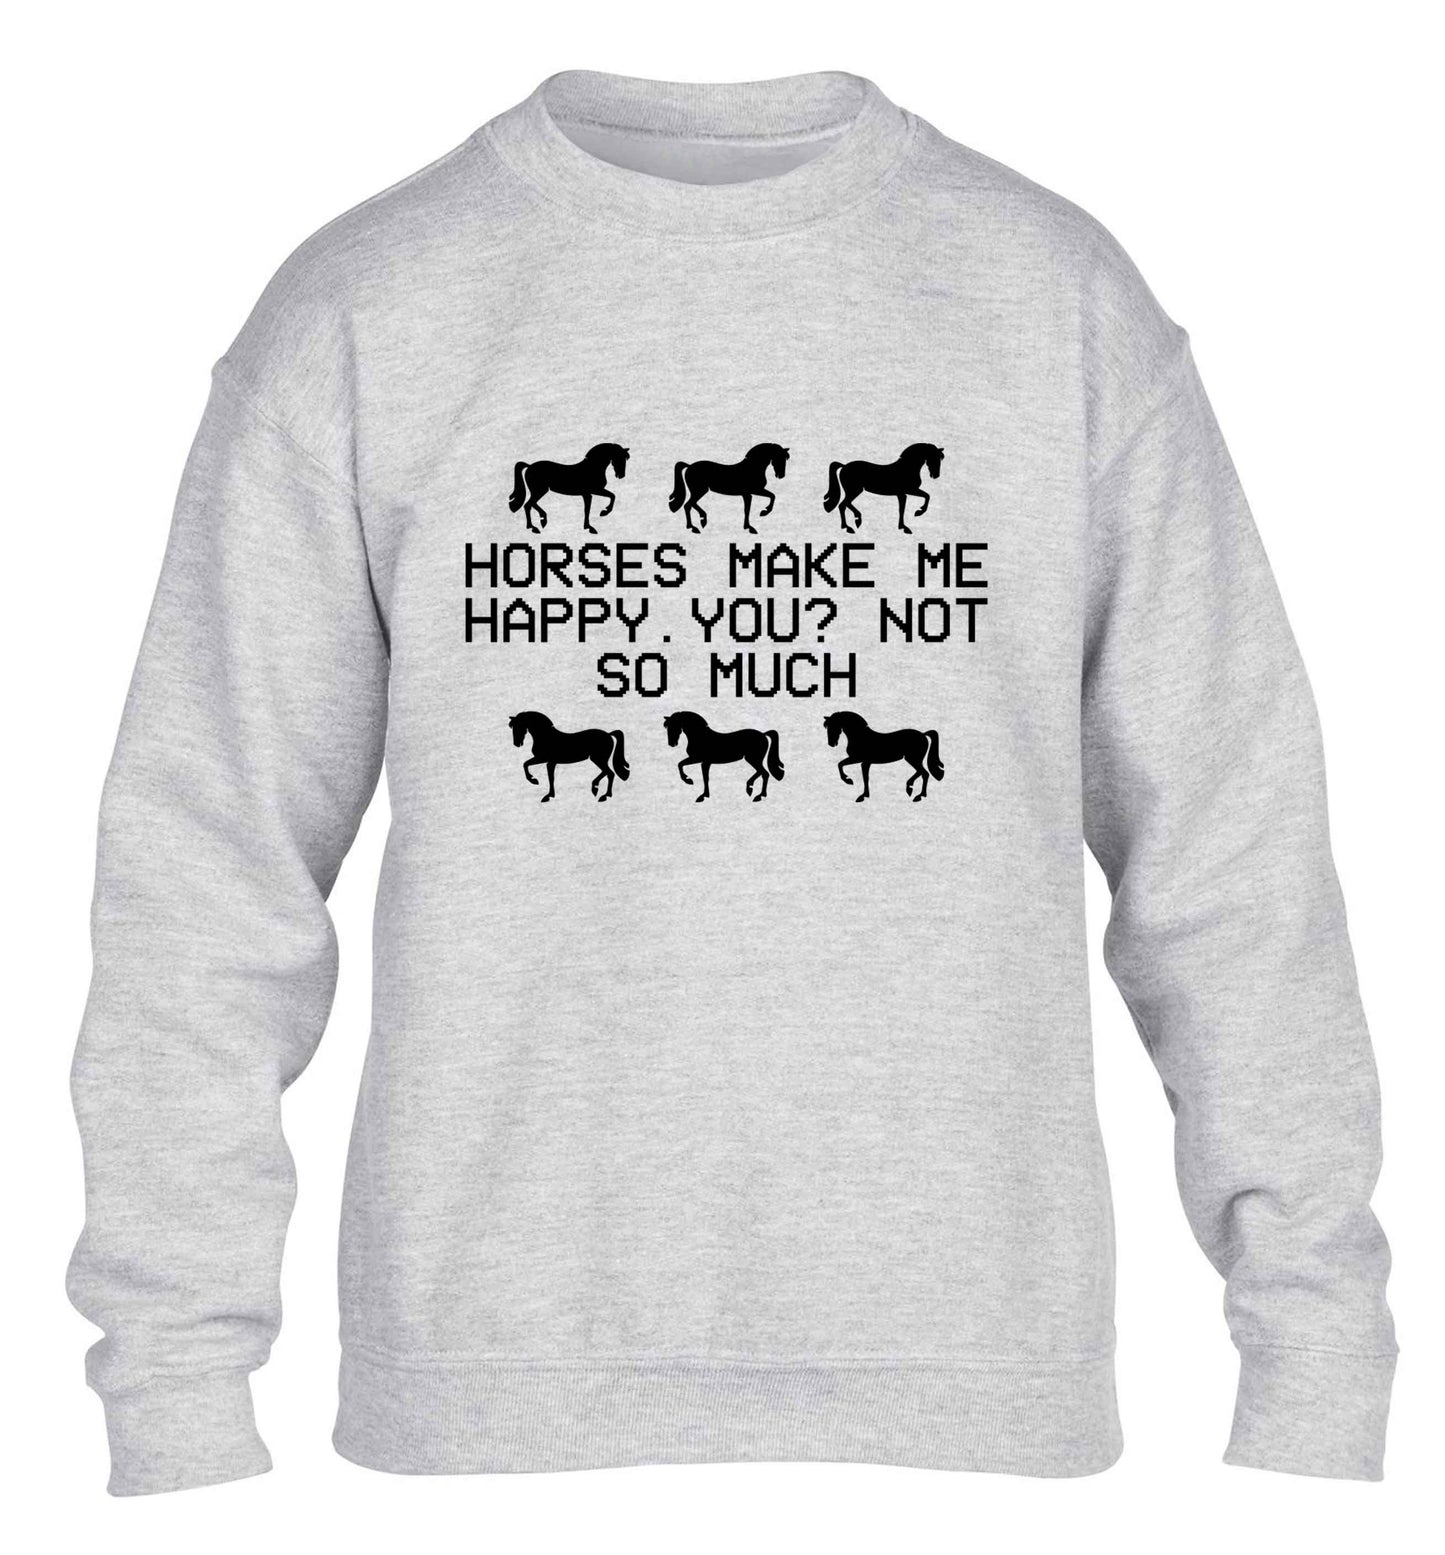 Horses make me happy, you not so much children's grey sweater 12-13 Years